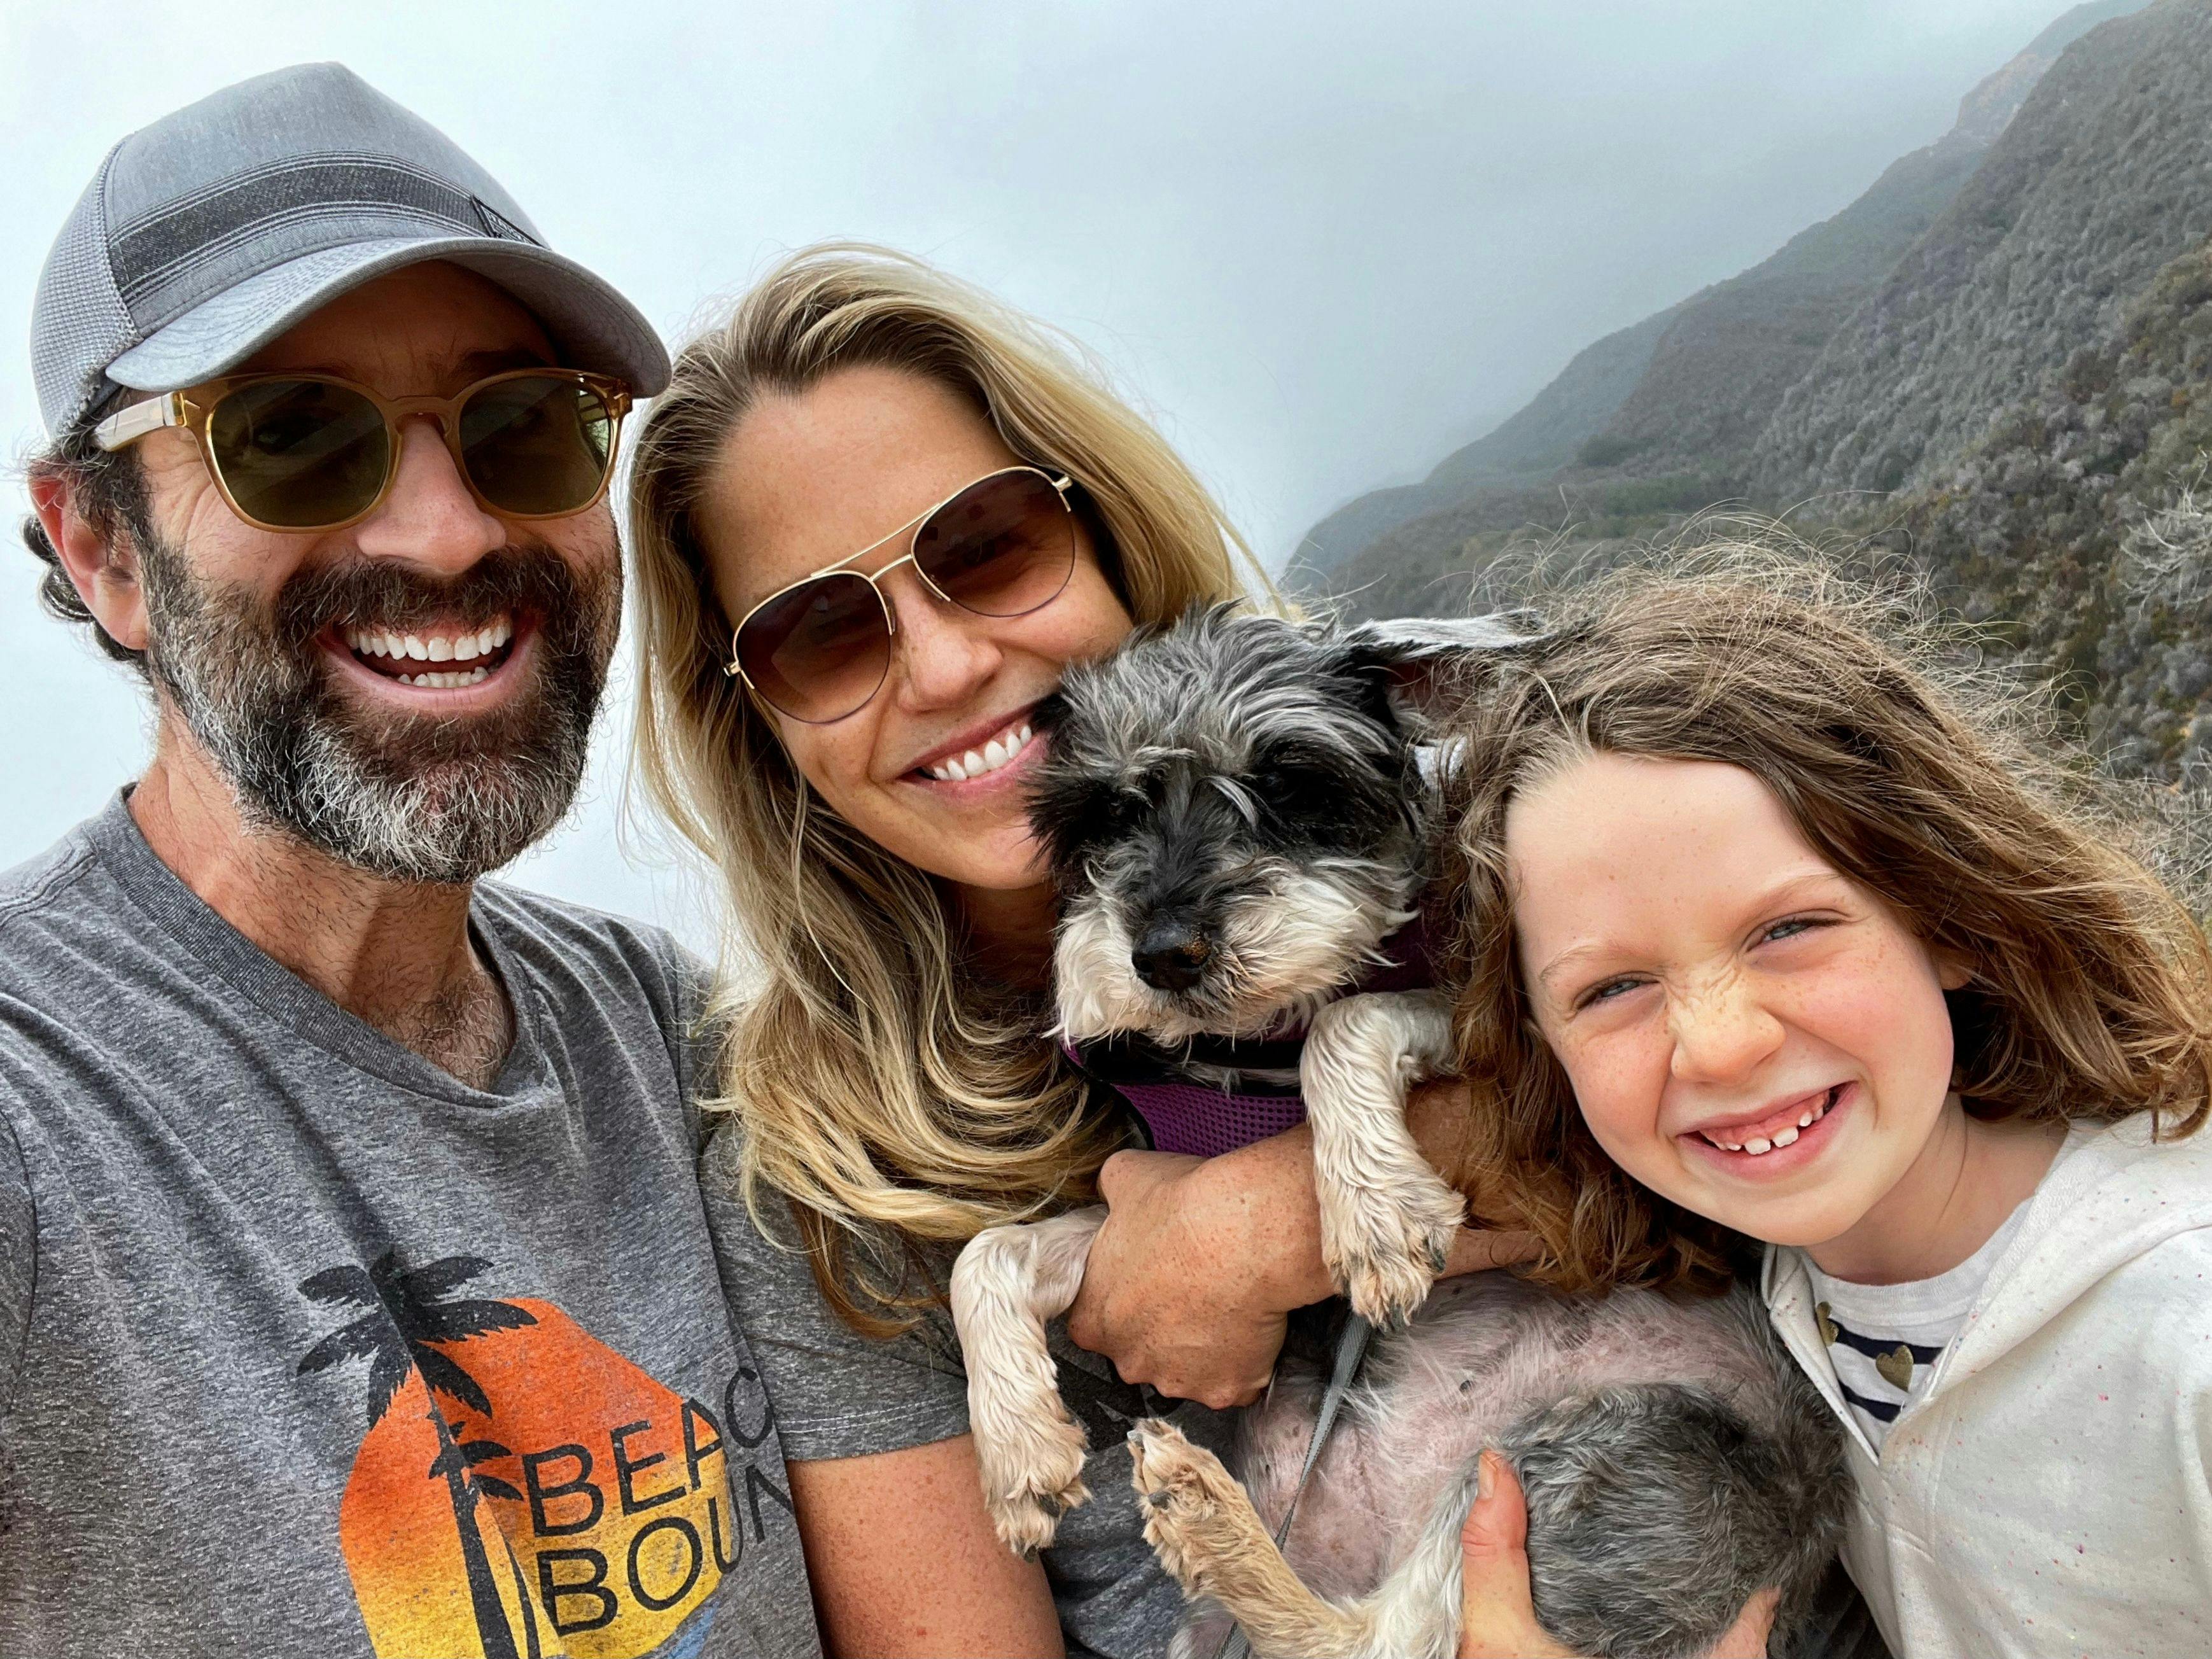 Jessica St. Clair and Dan O'Brien with the daughter, Bebe, living out the "heck yes" attitude they adopted during cancer treatment. 